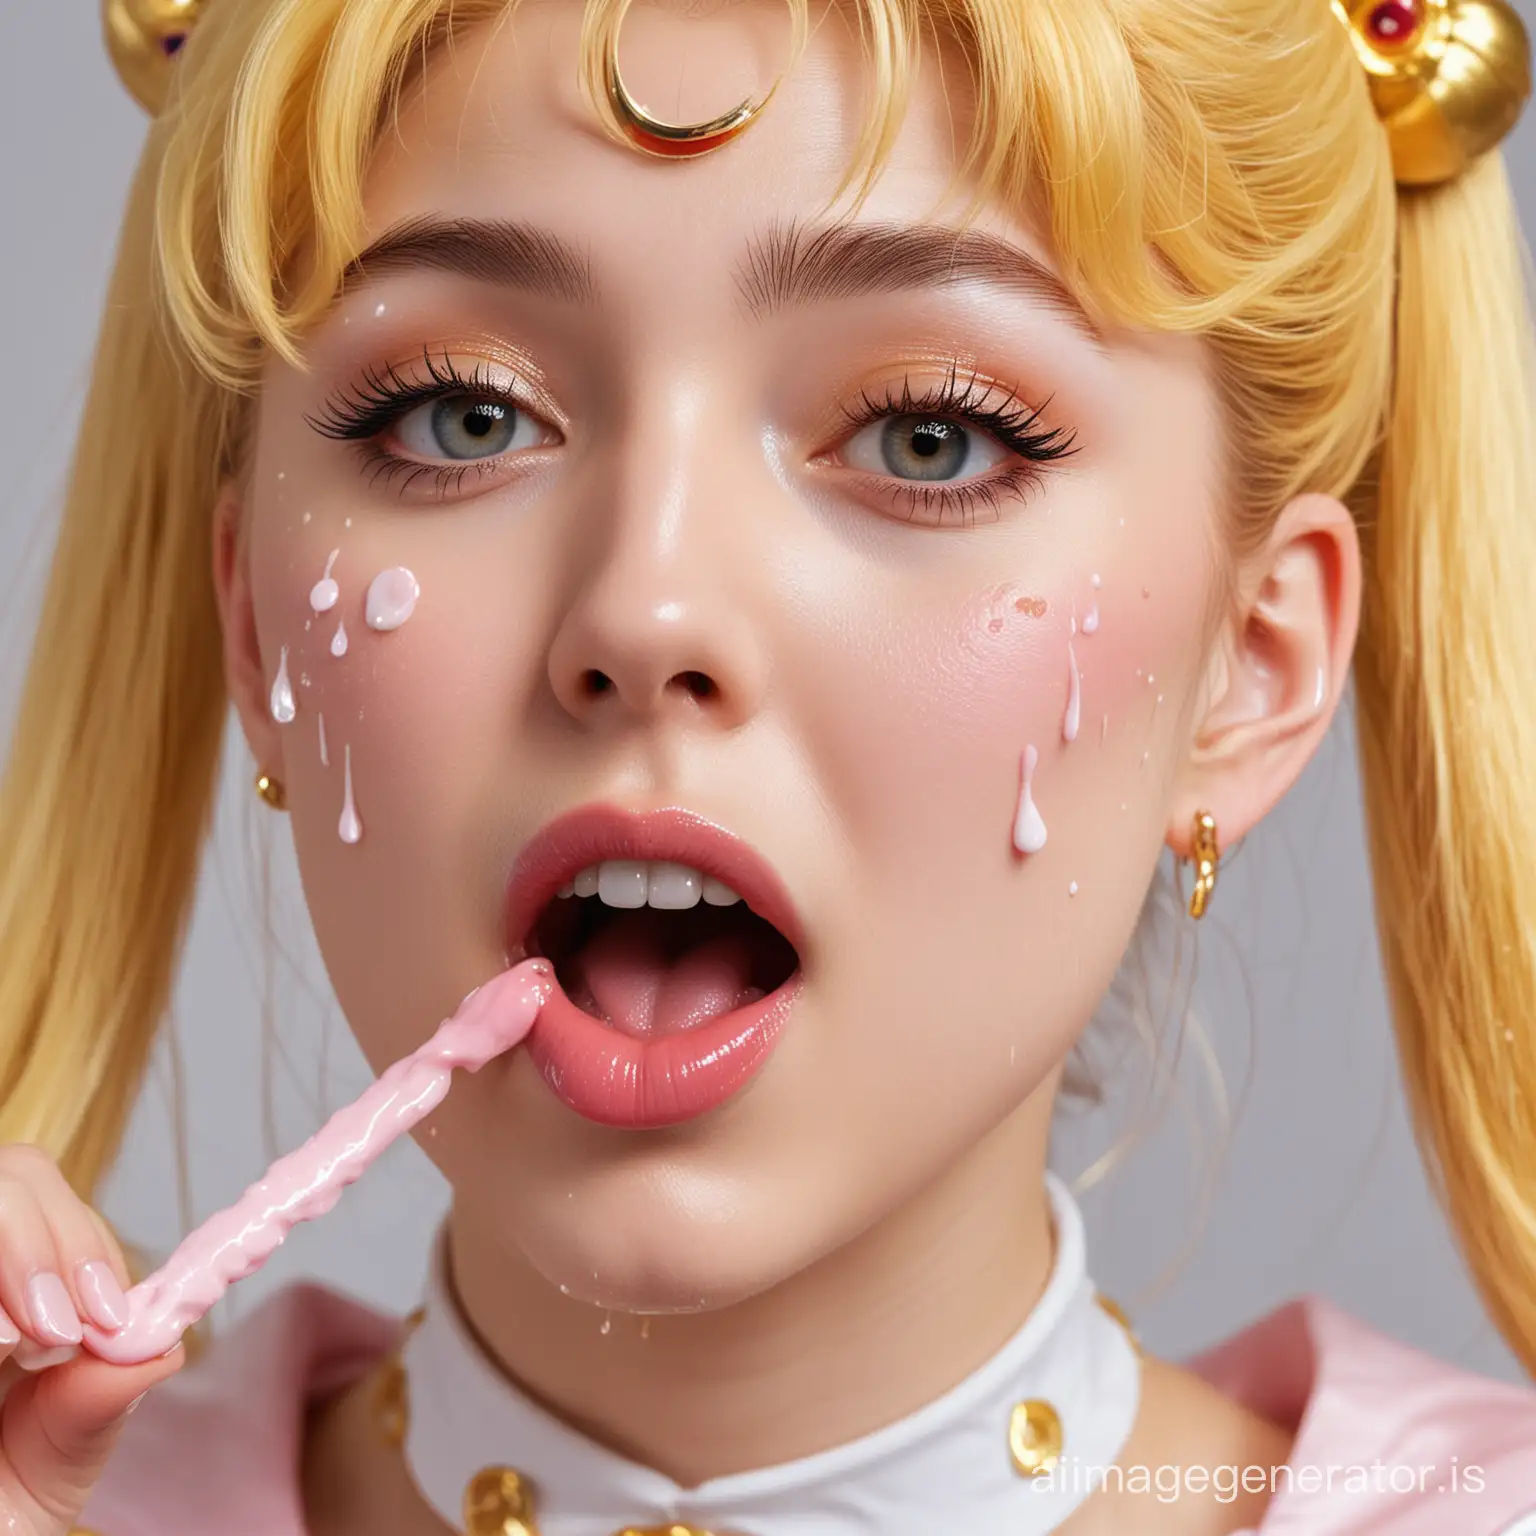 Sailor-Moon-Playfully-Catching-Cream-Drips-with-Tongue